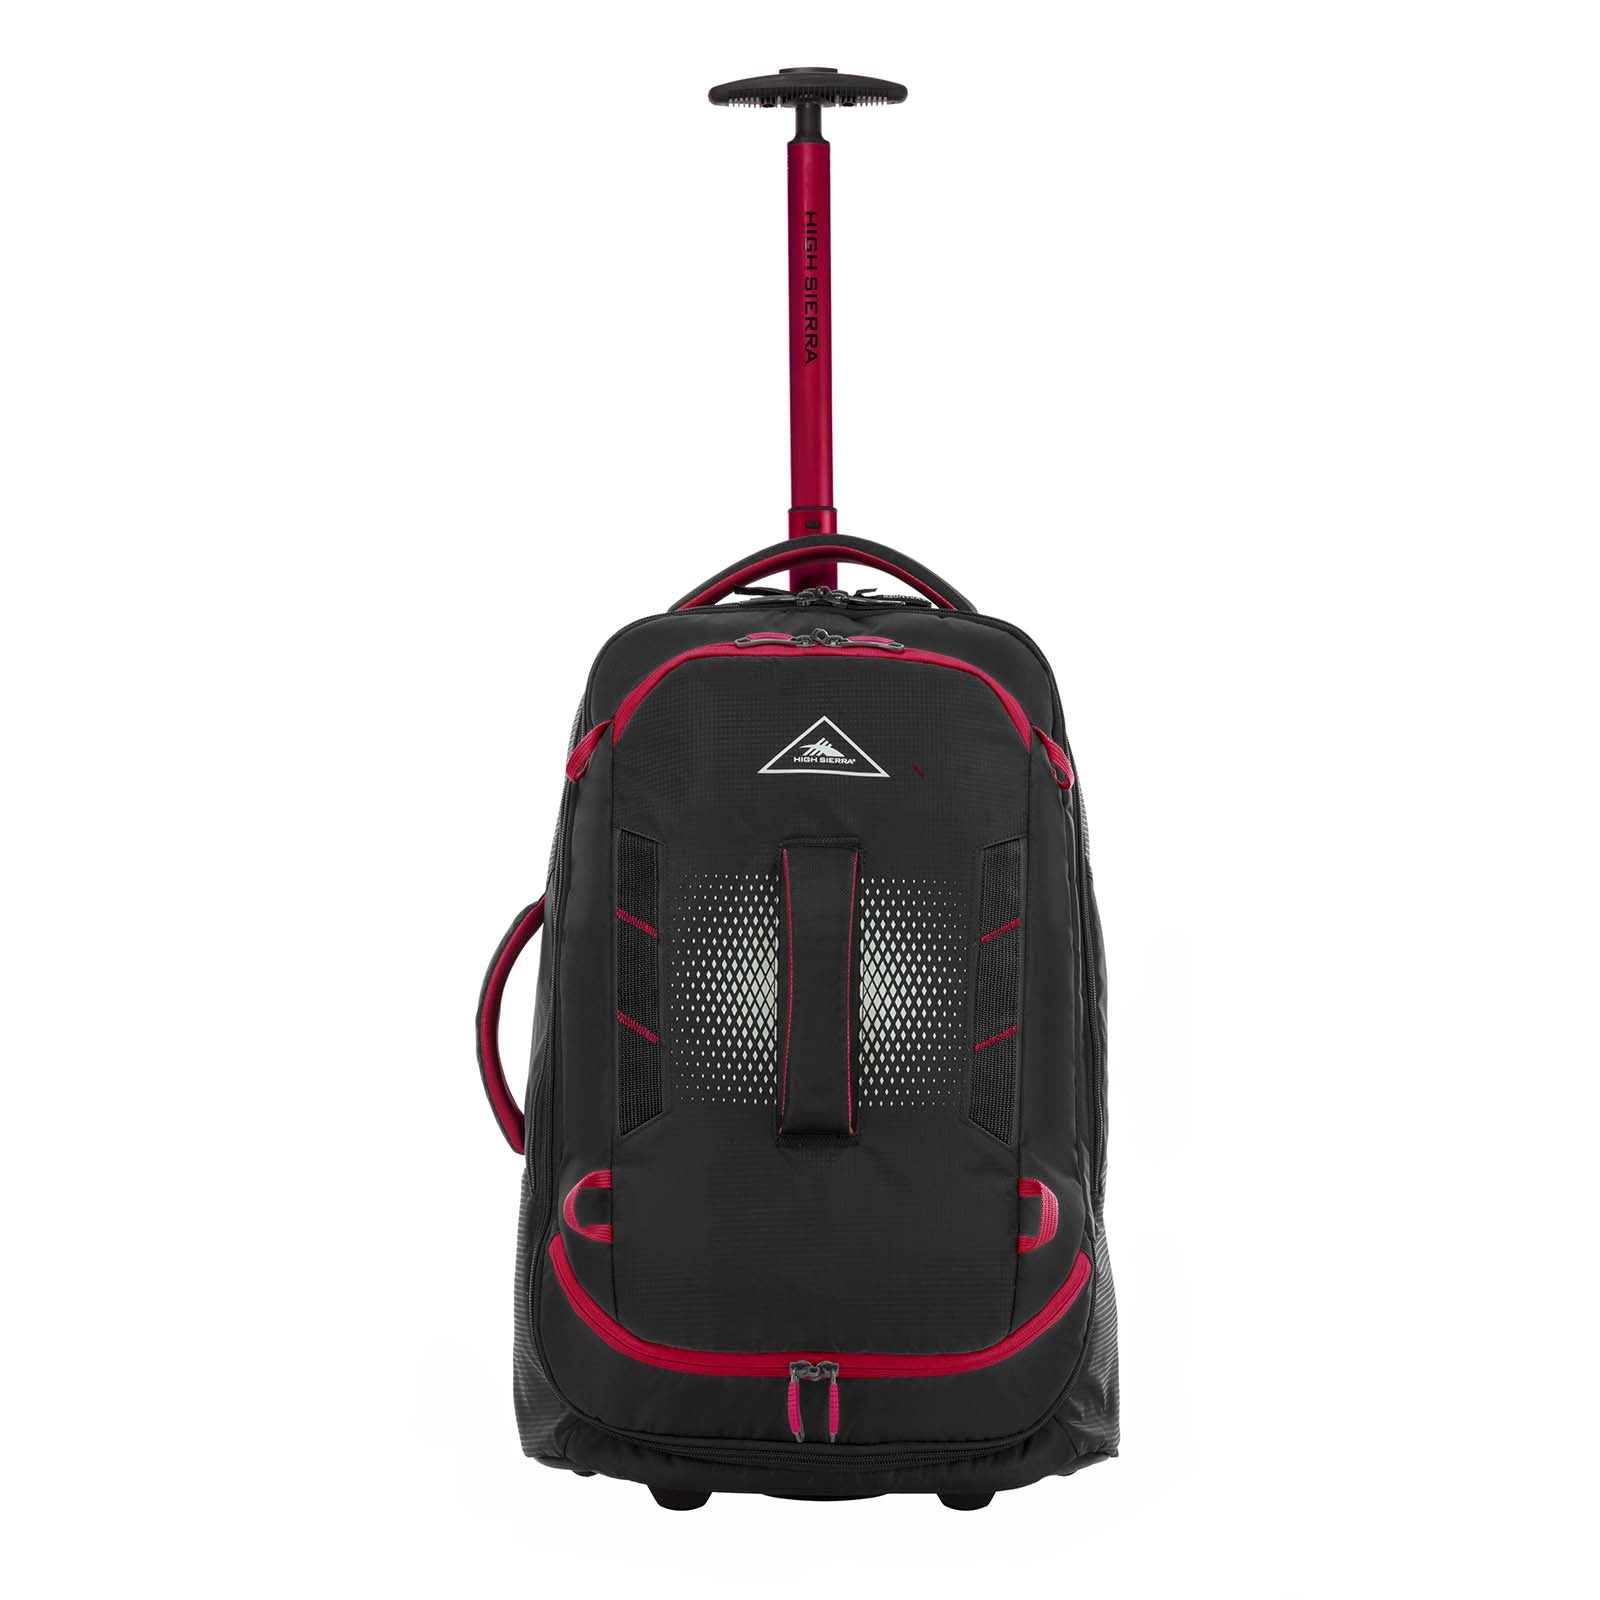    High_Sierra_Composite_V4_56cm_Carry-On_Wheeled_Duffel_Black_Red_Face